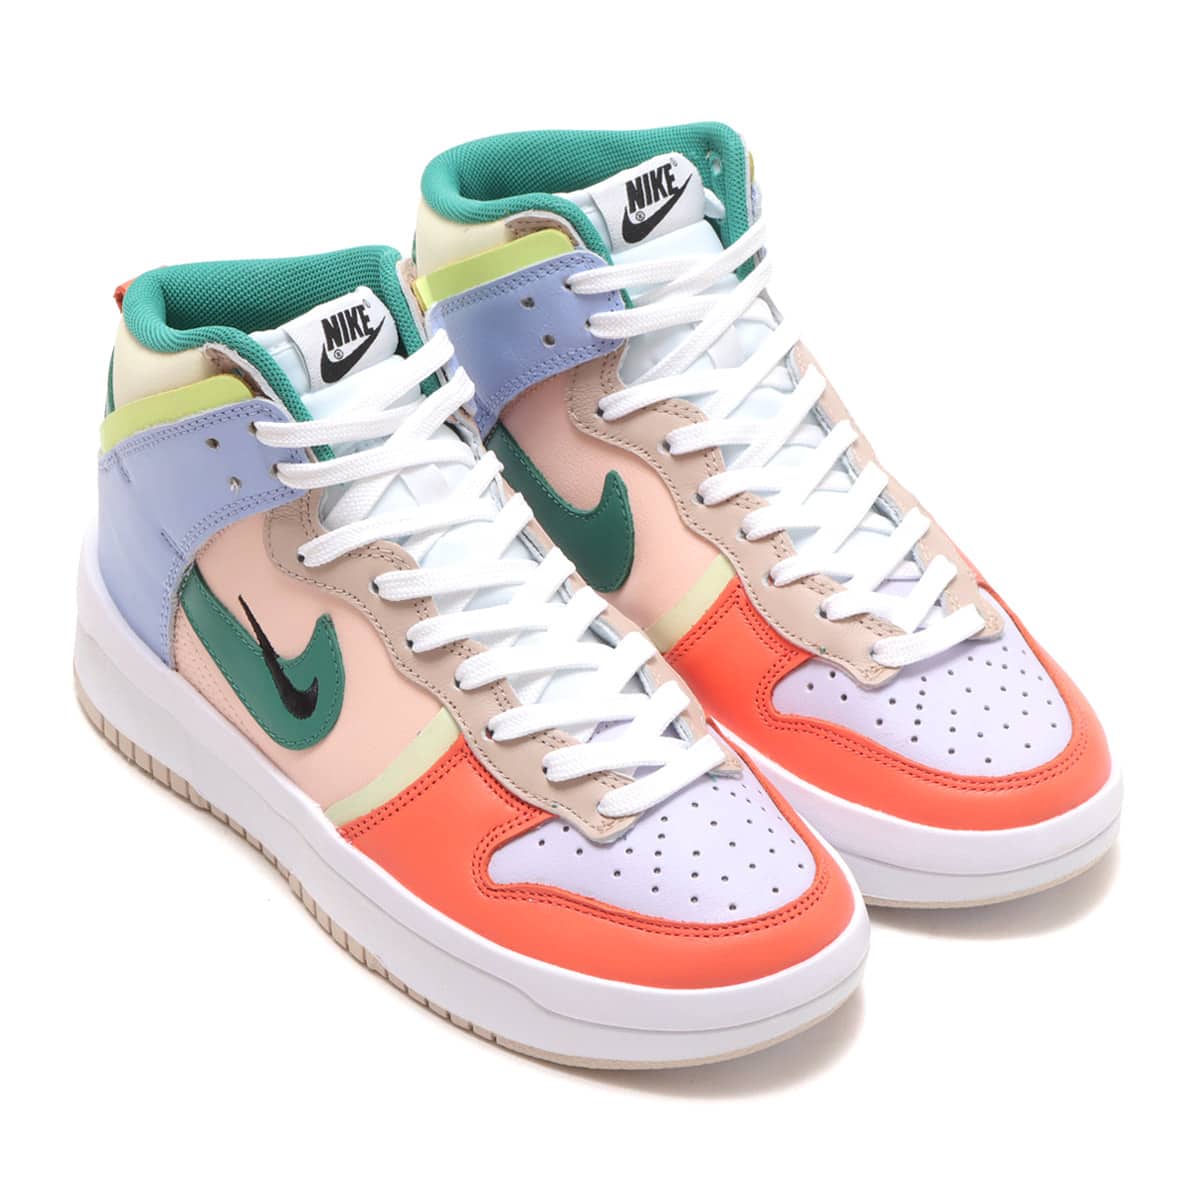 NIKE WMNS DUNK HIGH UP CASHMERE/GREEN NOISE PALE CORAL FA I